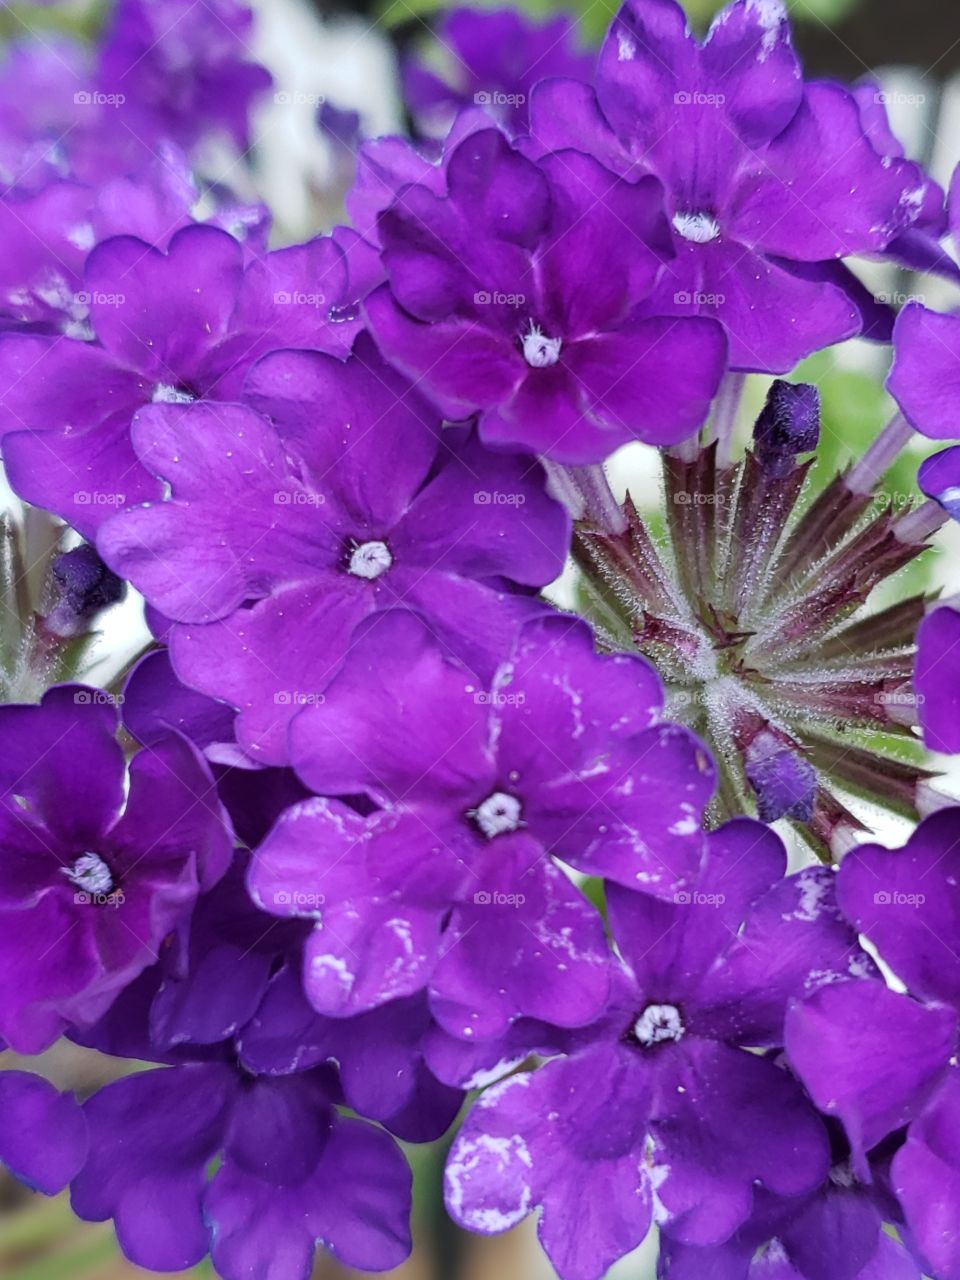 Close-up of purple flowers, textured with silver lines throughout